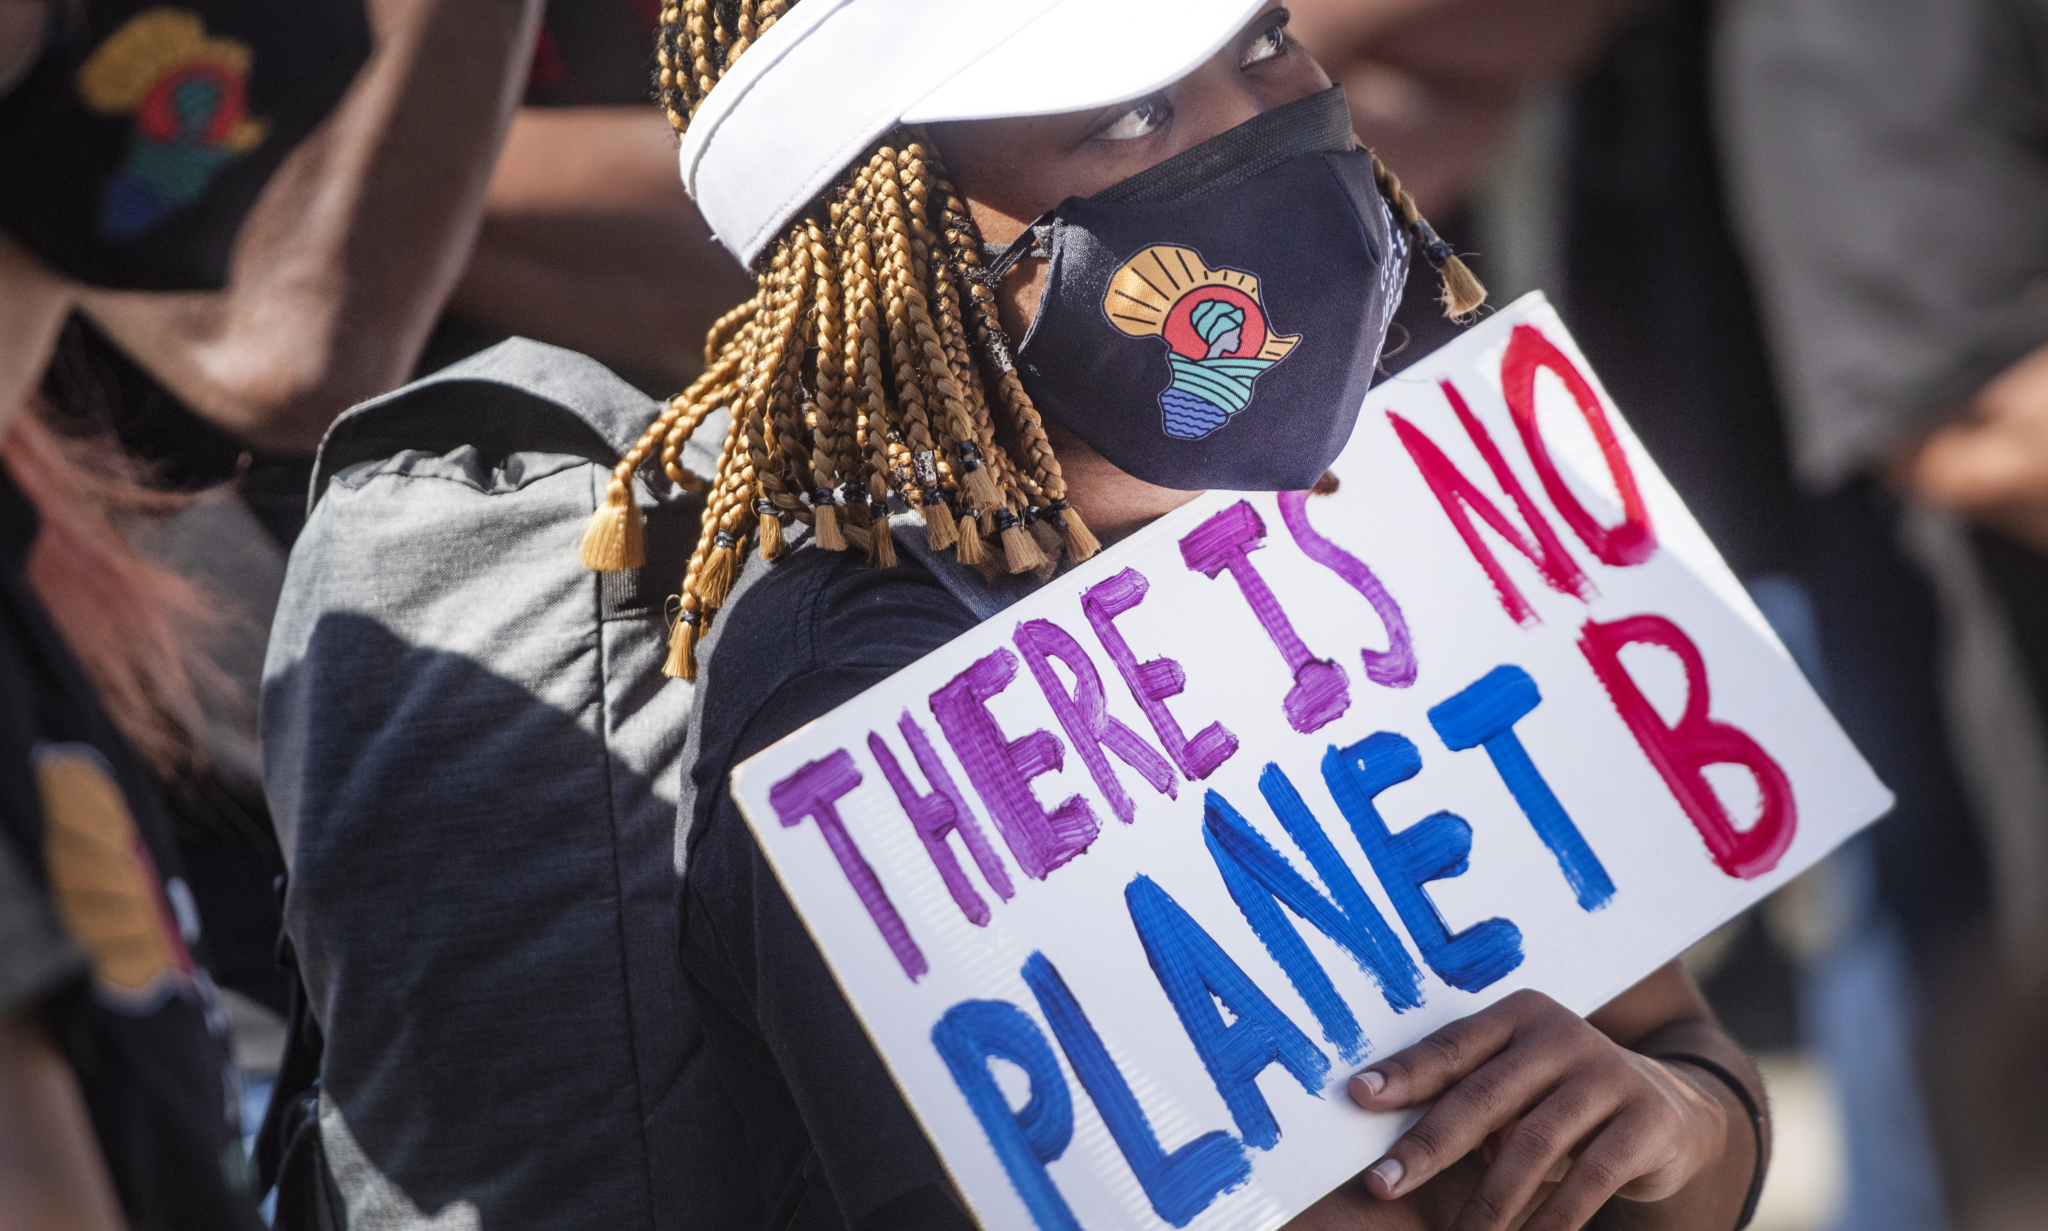 A woman at a rally in South Africa holds a sign that says: THERE IS NO PLANET B"